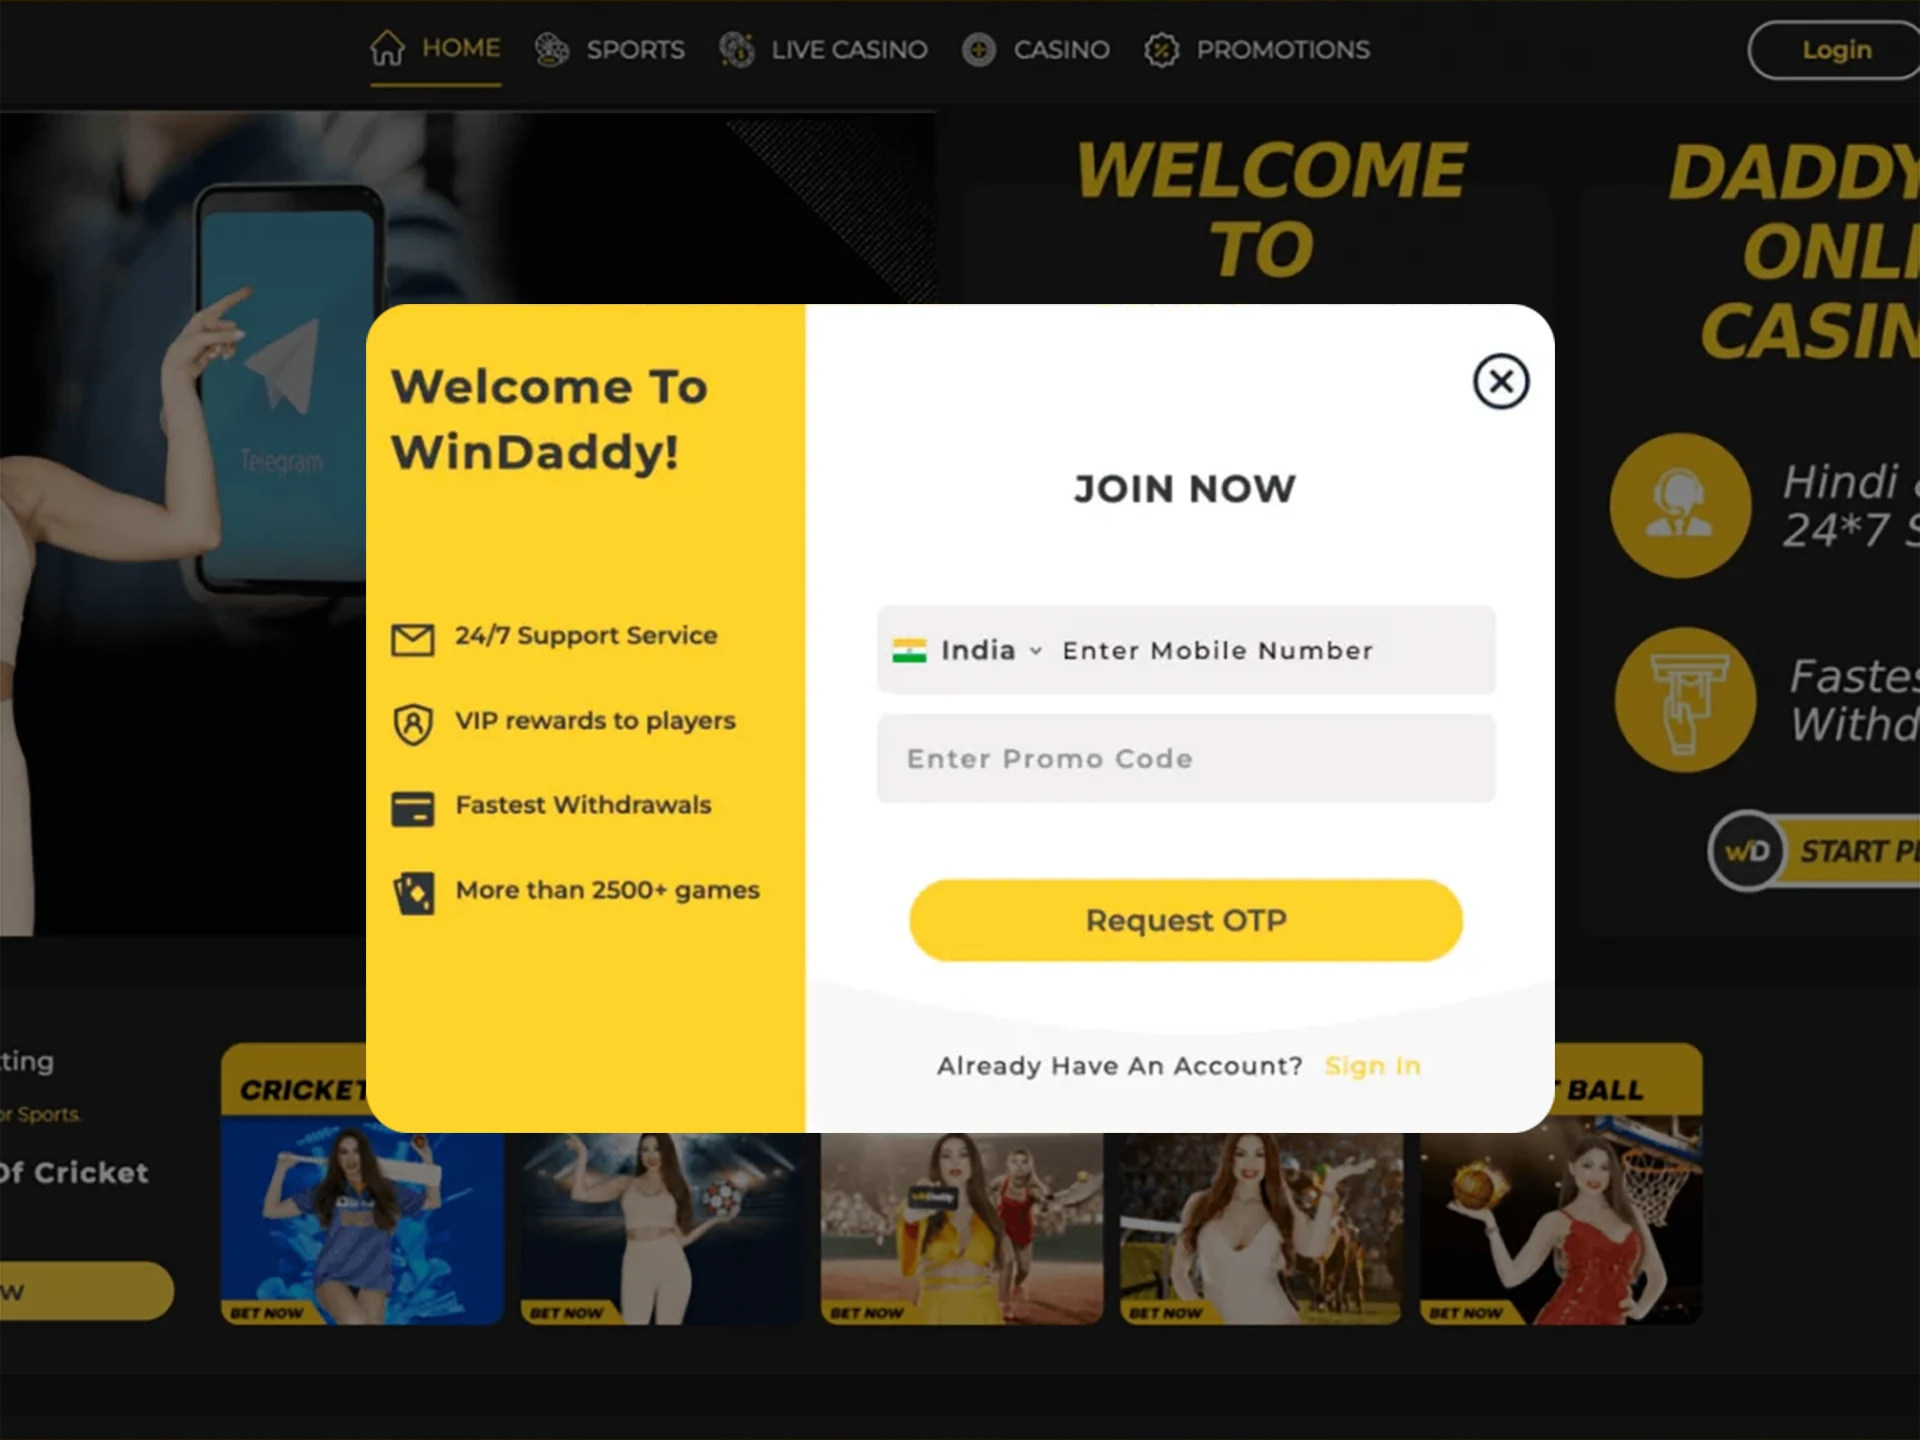 Open the Windaddy website and register.